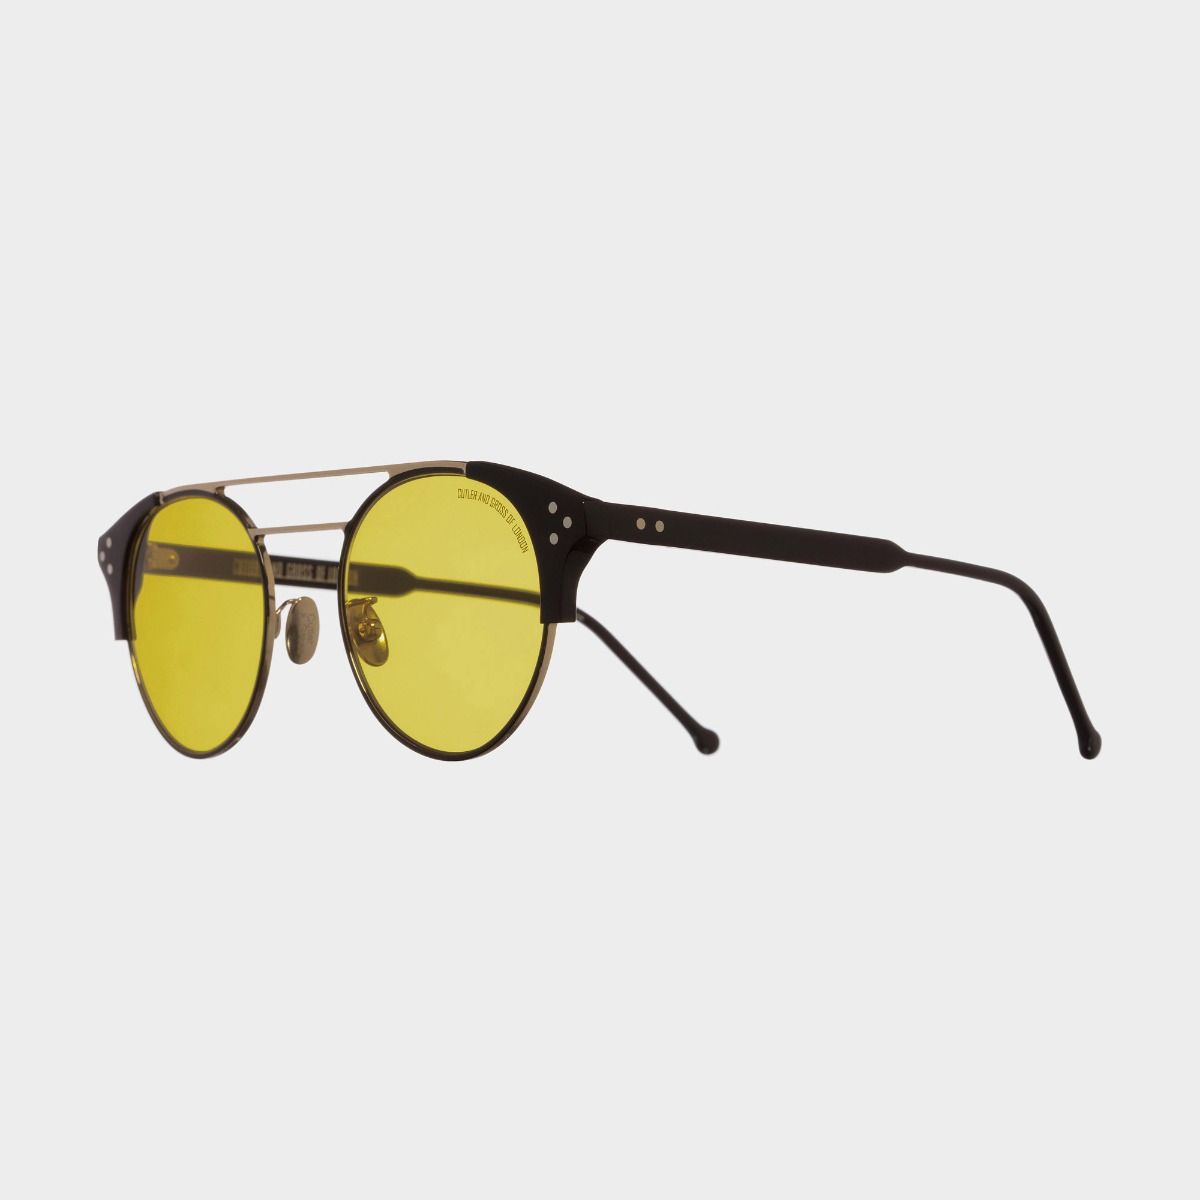 Cutler and Gross 1271 Round Sunglasses - 06